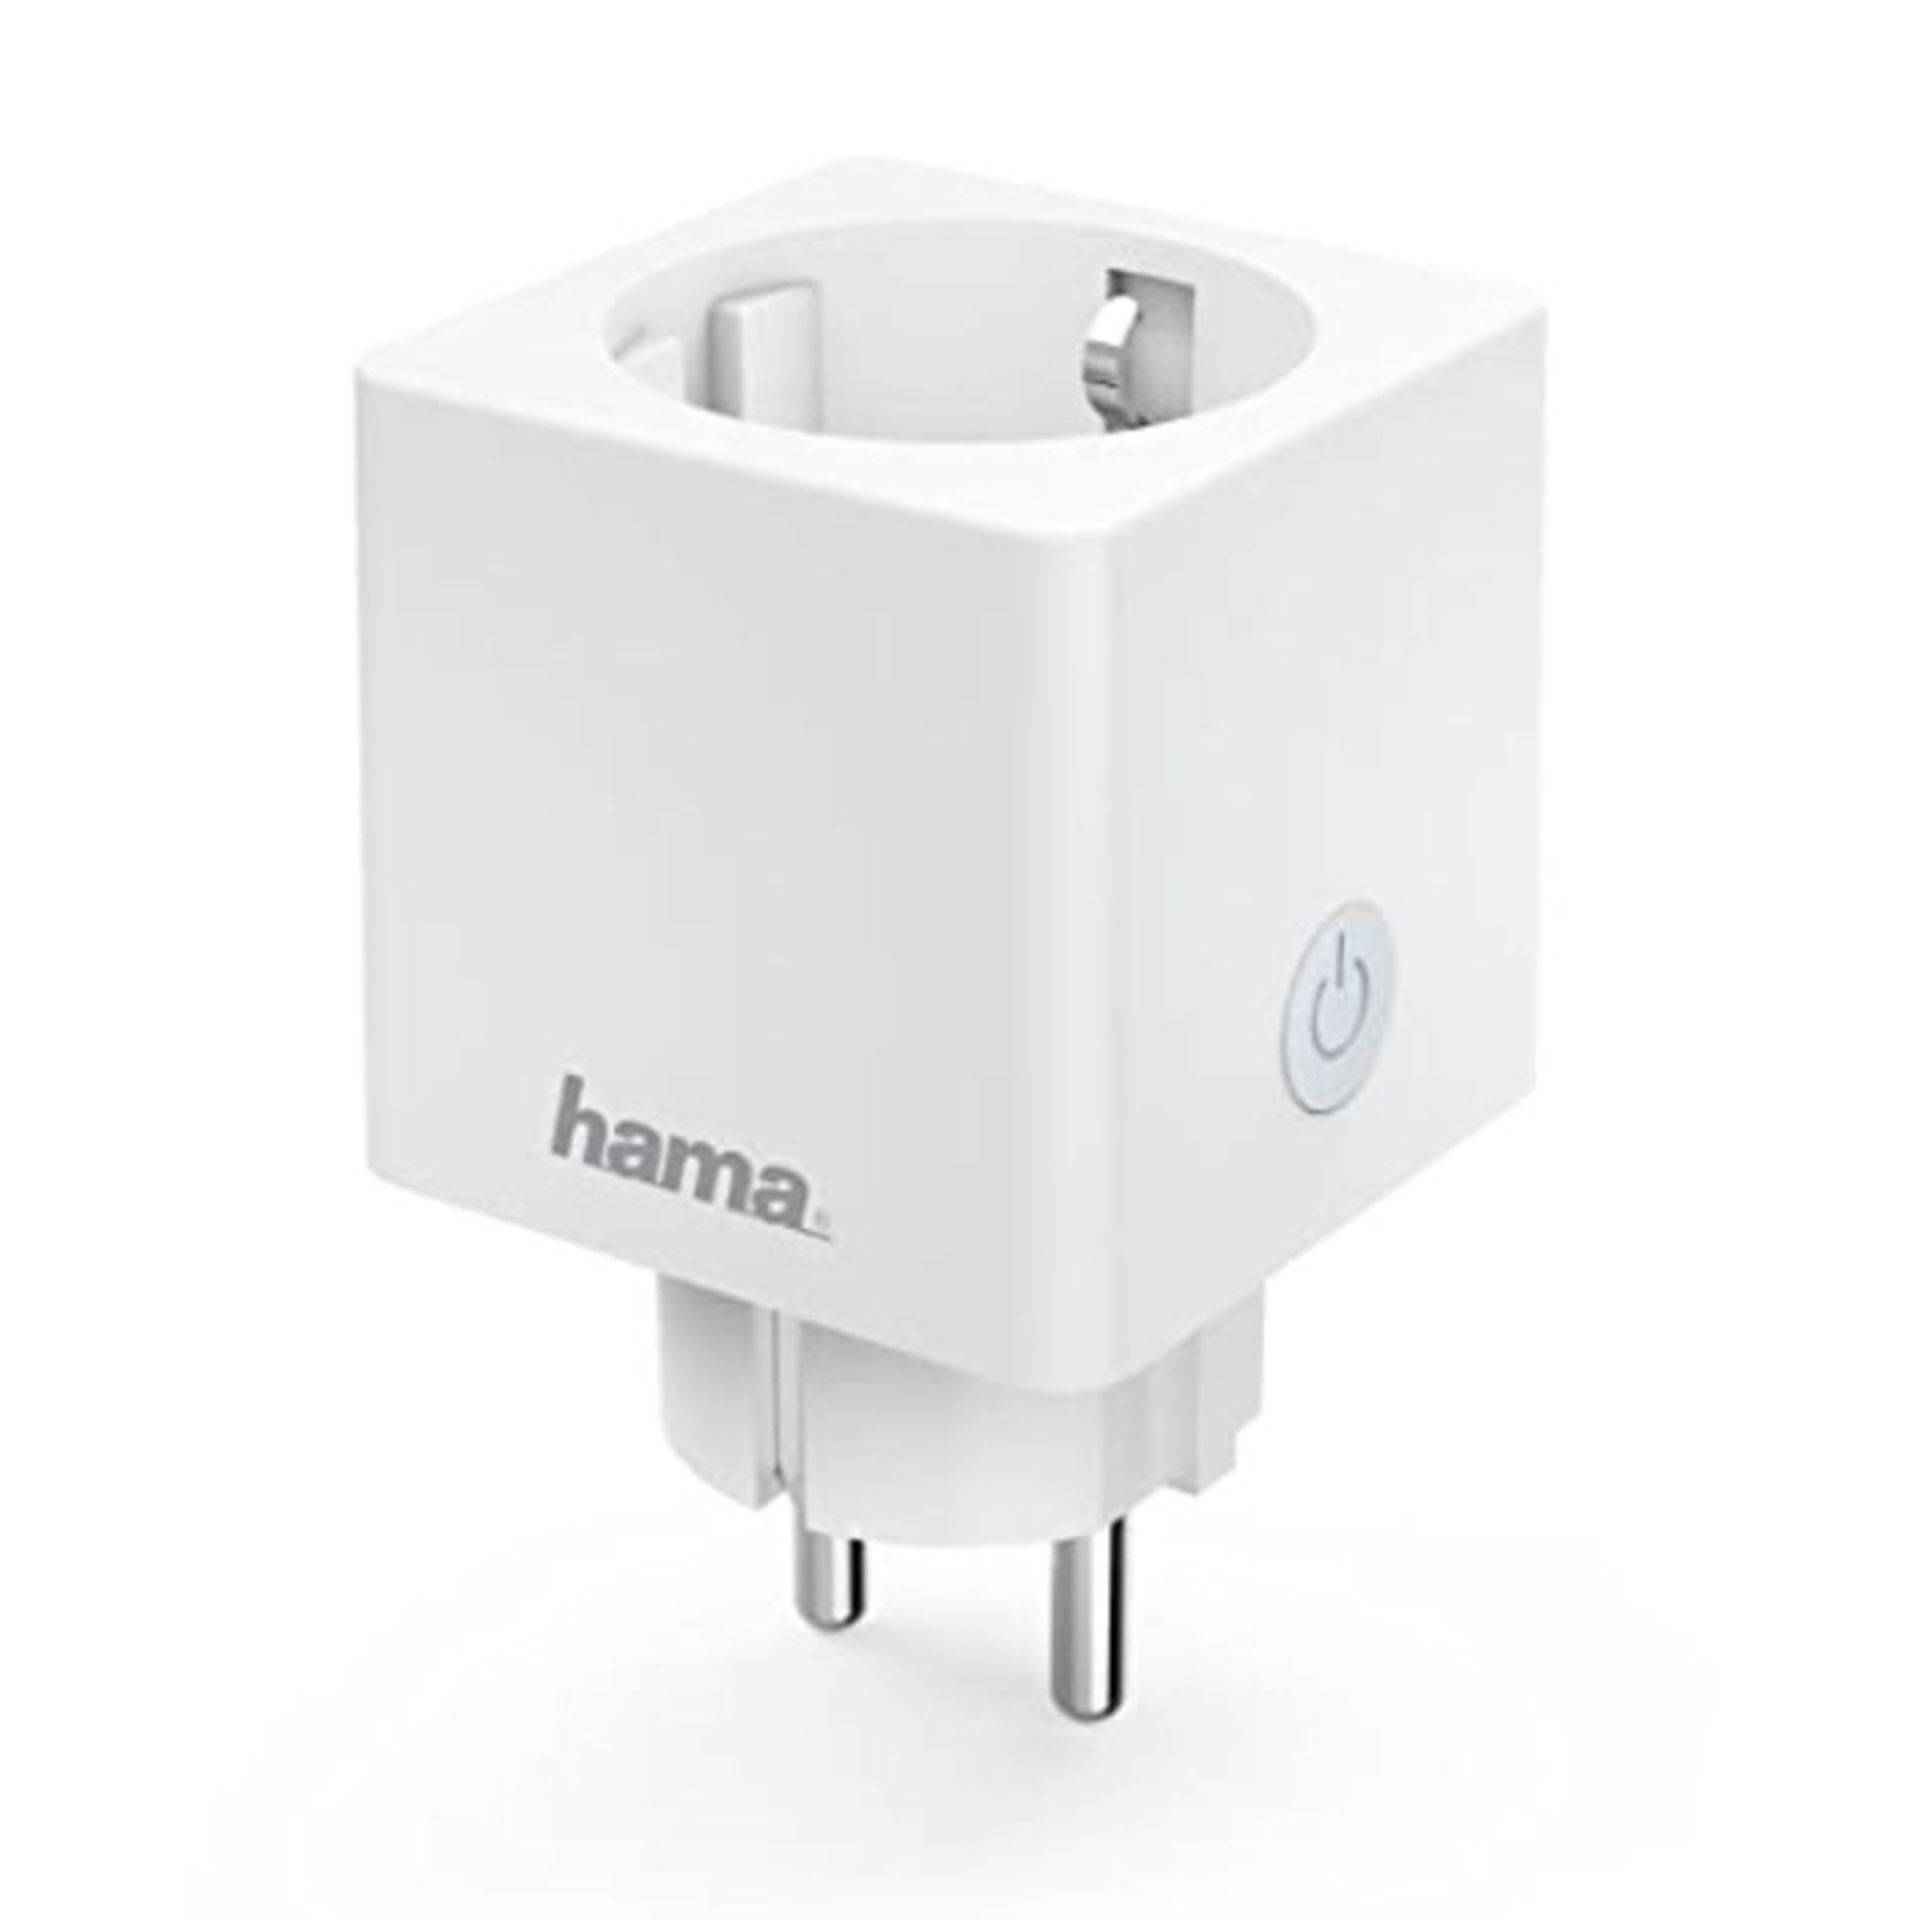 Hama 00176575 Wi-Fi Steckdose with Messfunktion Innenbereich 3680W